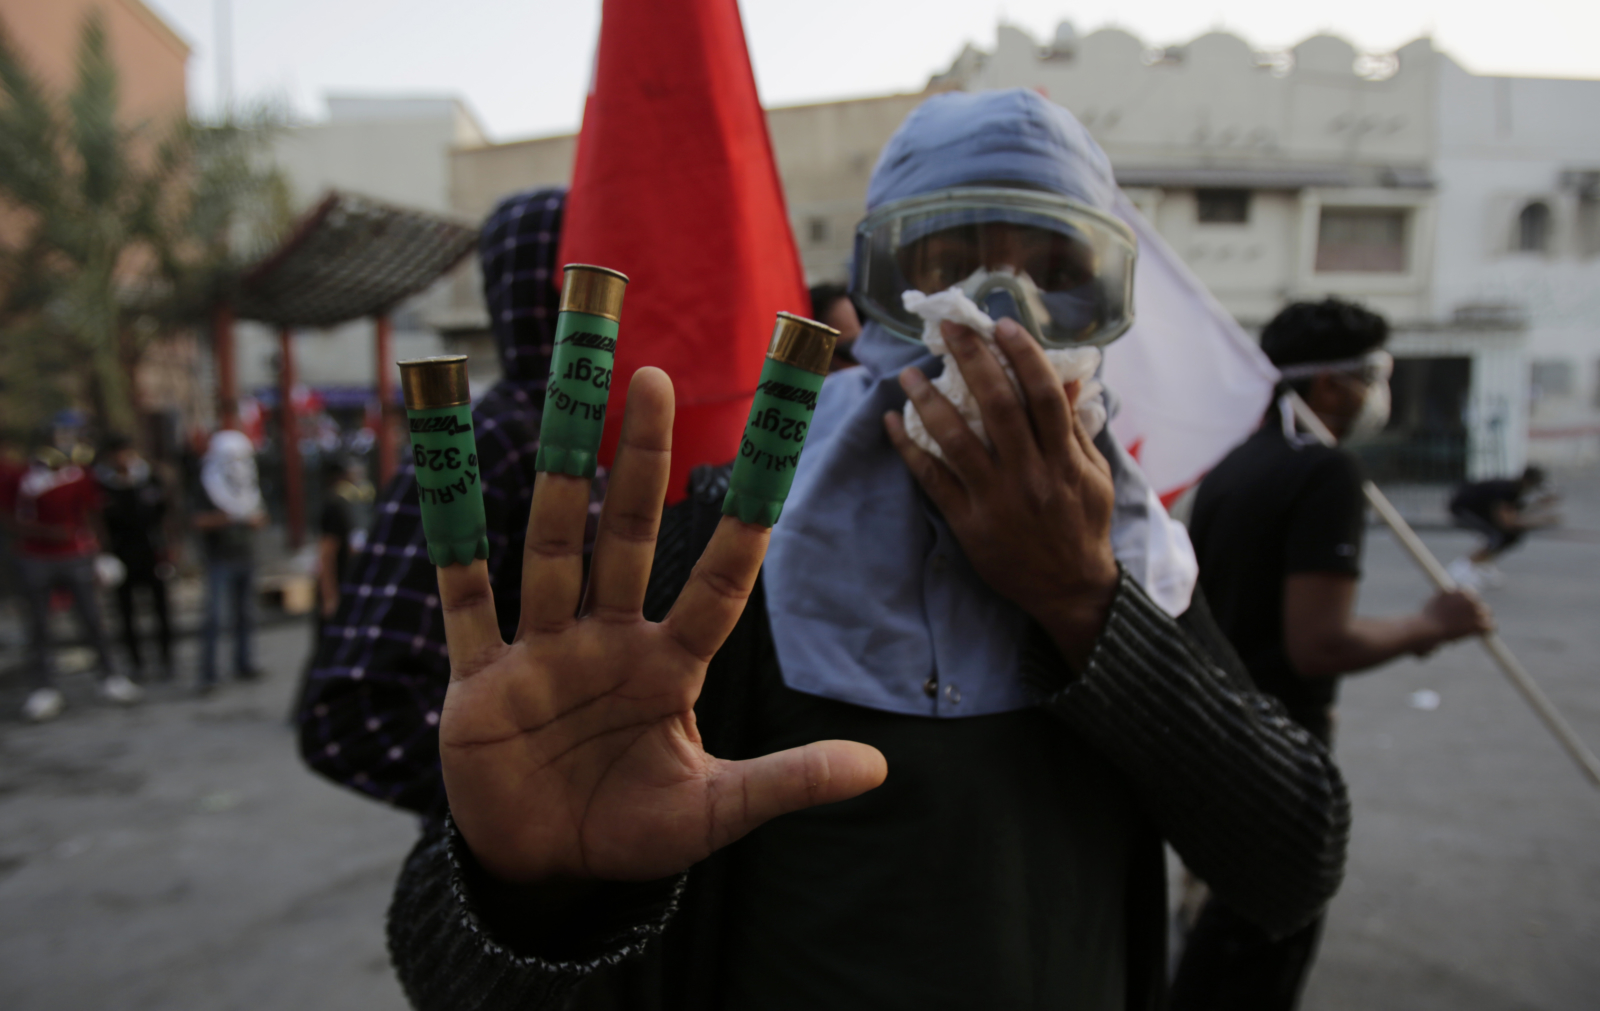 Bahrain’s UK-backed human rights bodies fall short on 2011 promises of reform